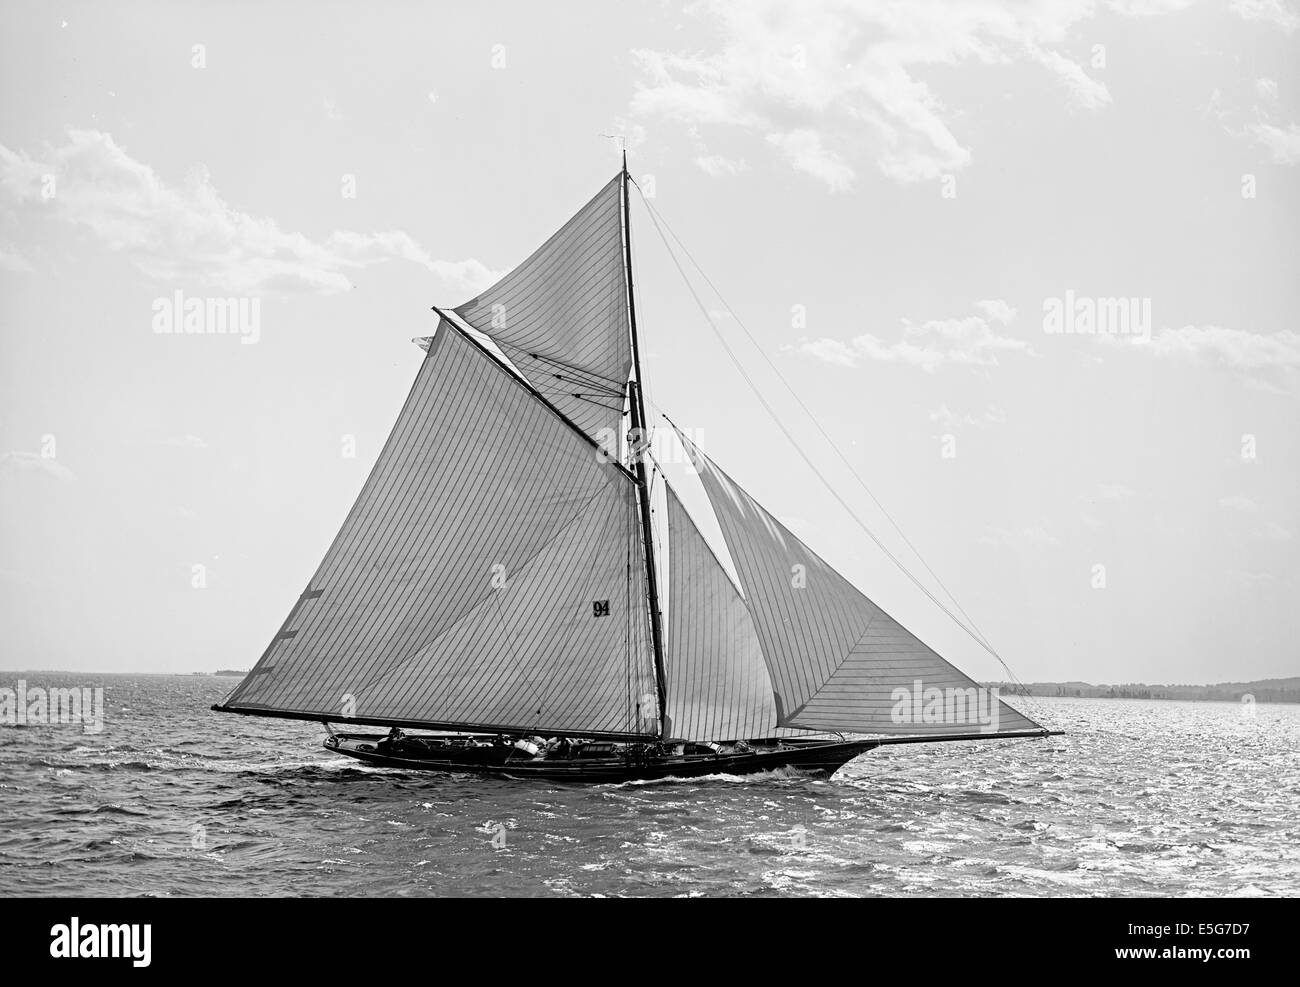 1890s yacht Black and White Stock Photos & Images - Alamy